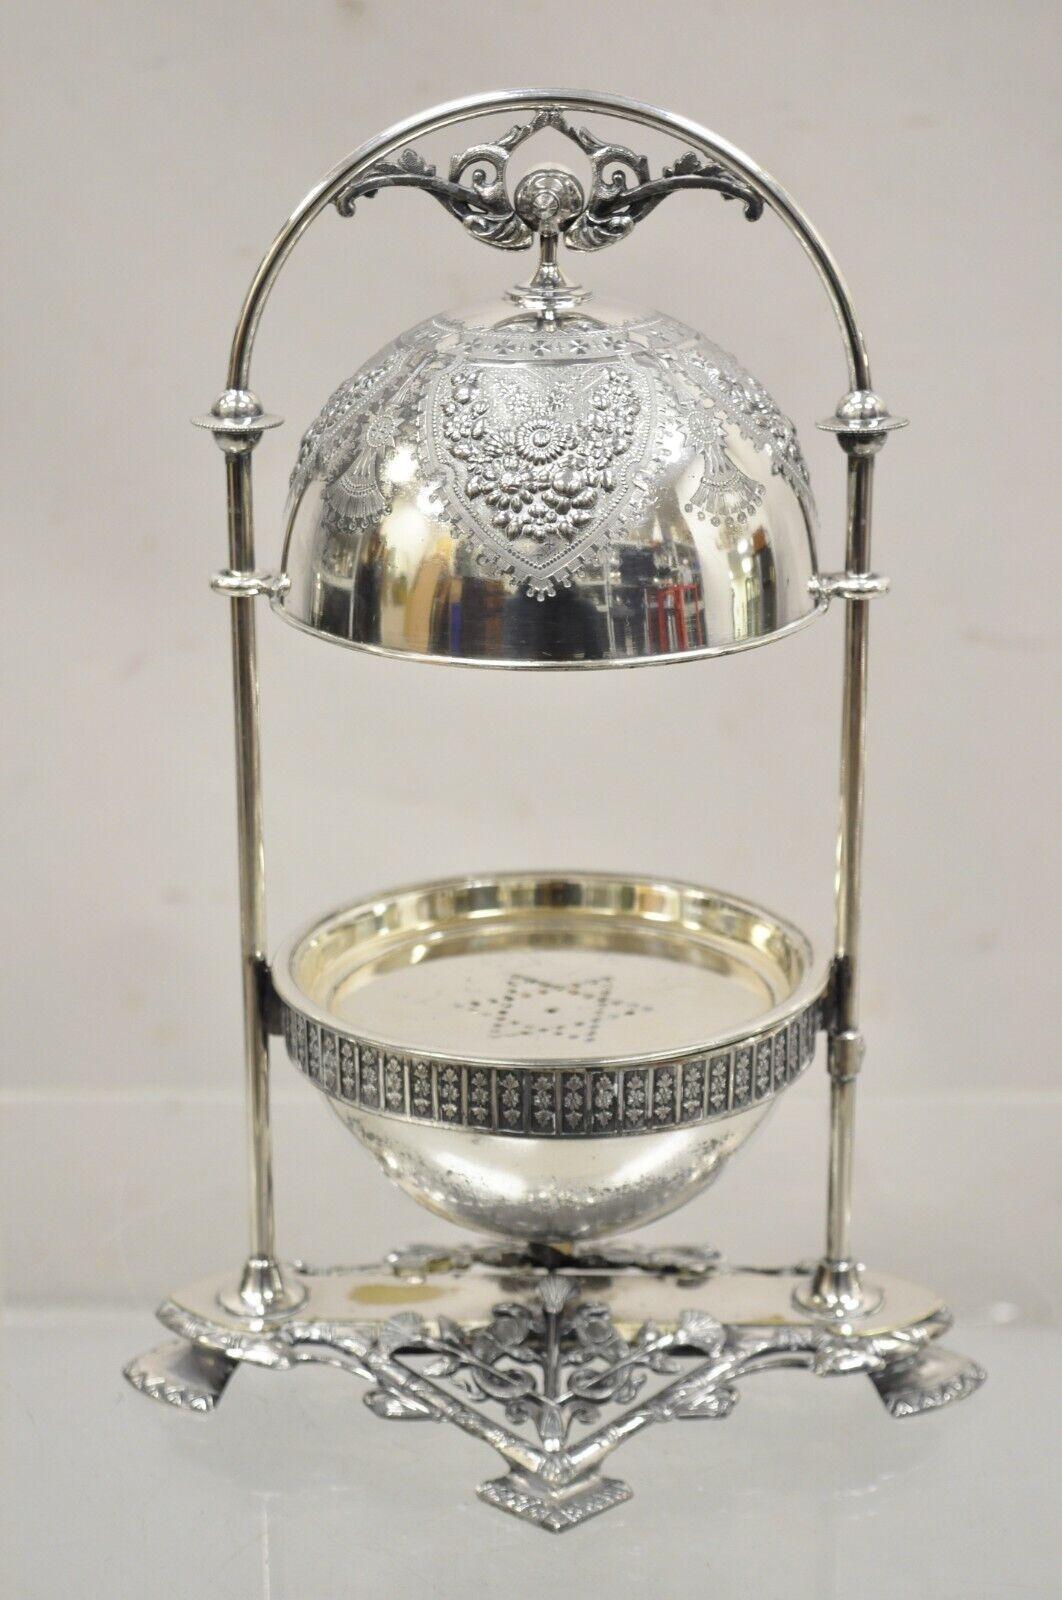 Antique Meriden Co Victorian Silver Plated Covered Butter Butler Butter Dish. Item features 